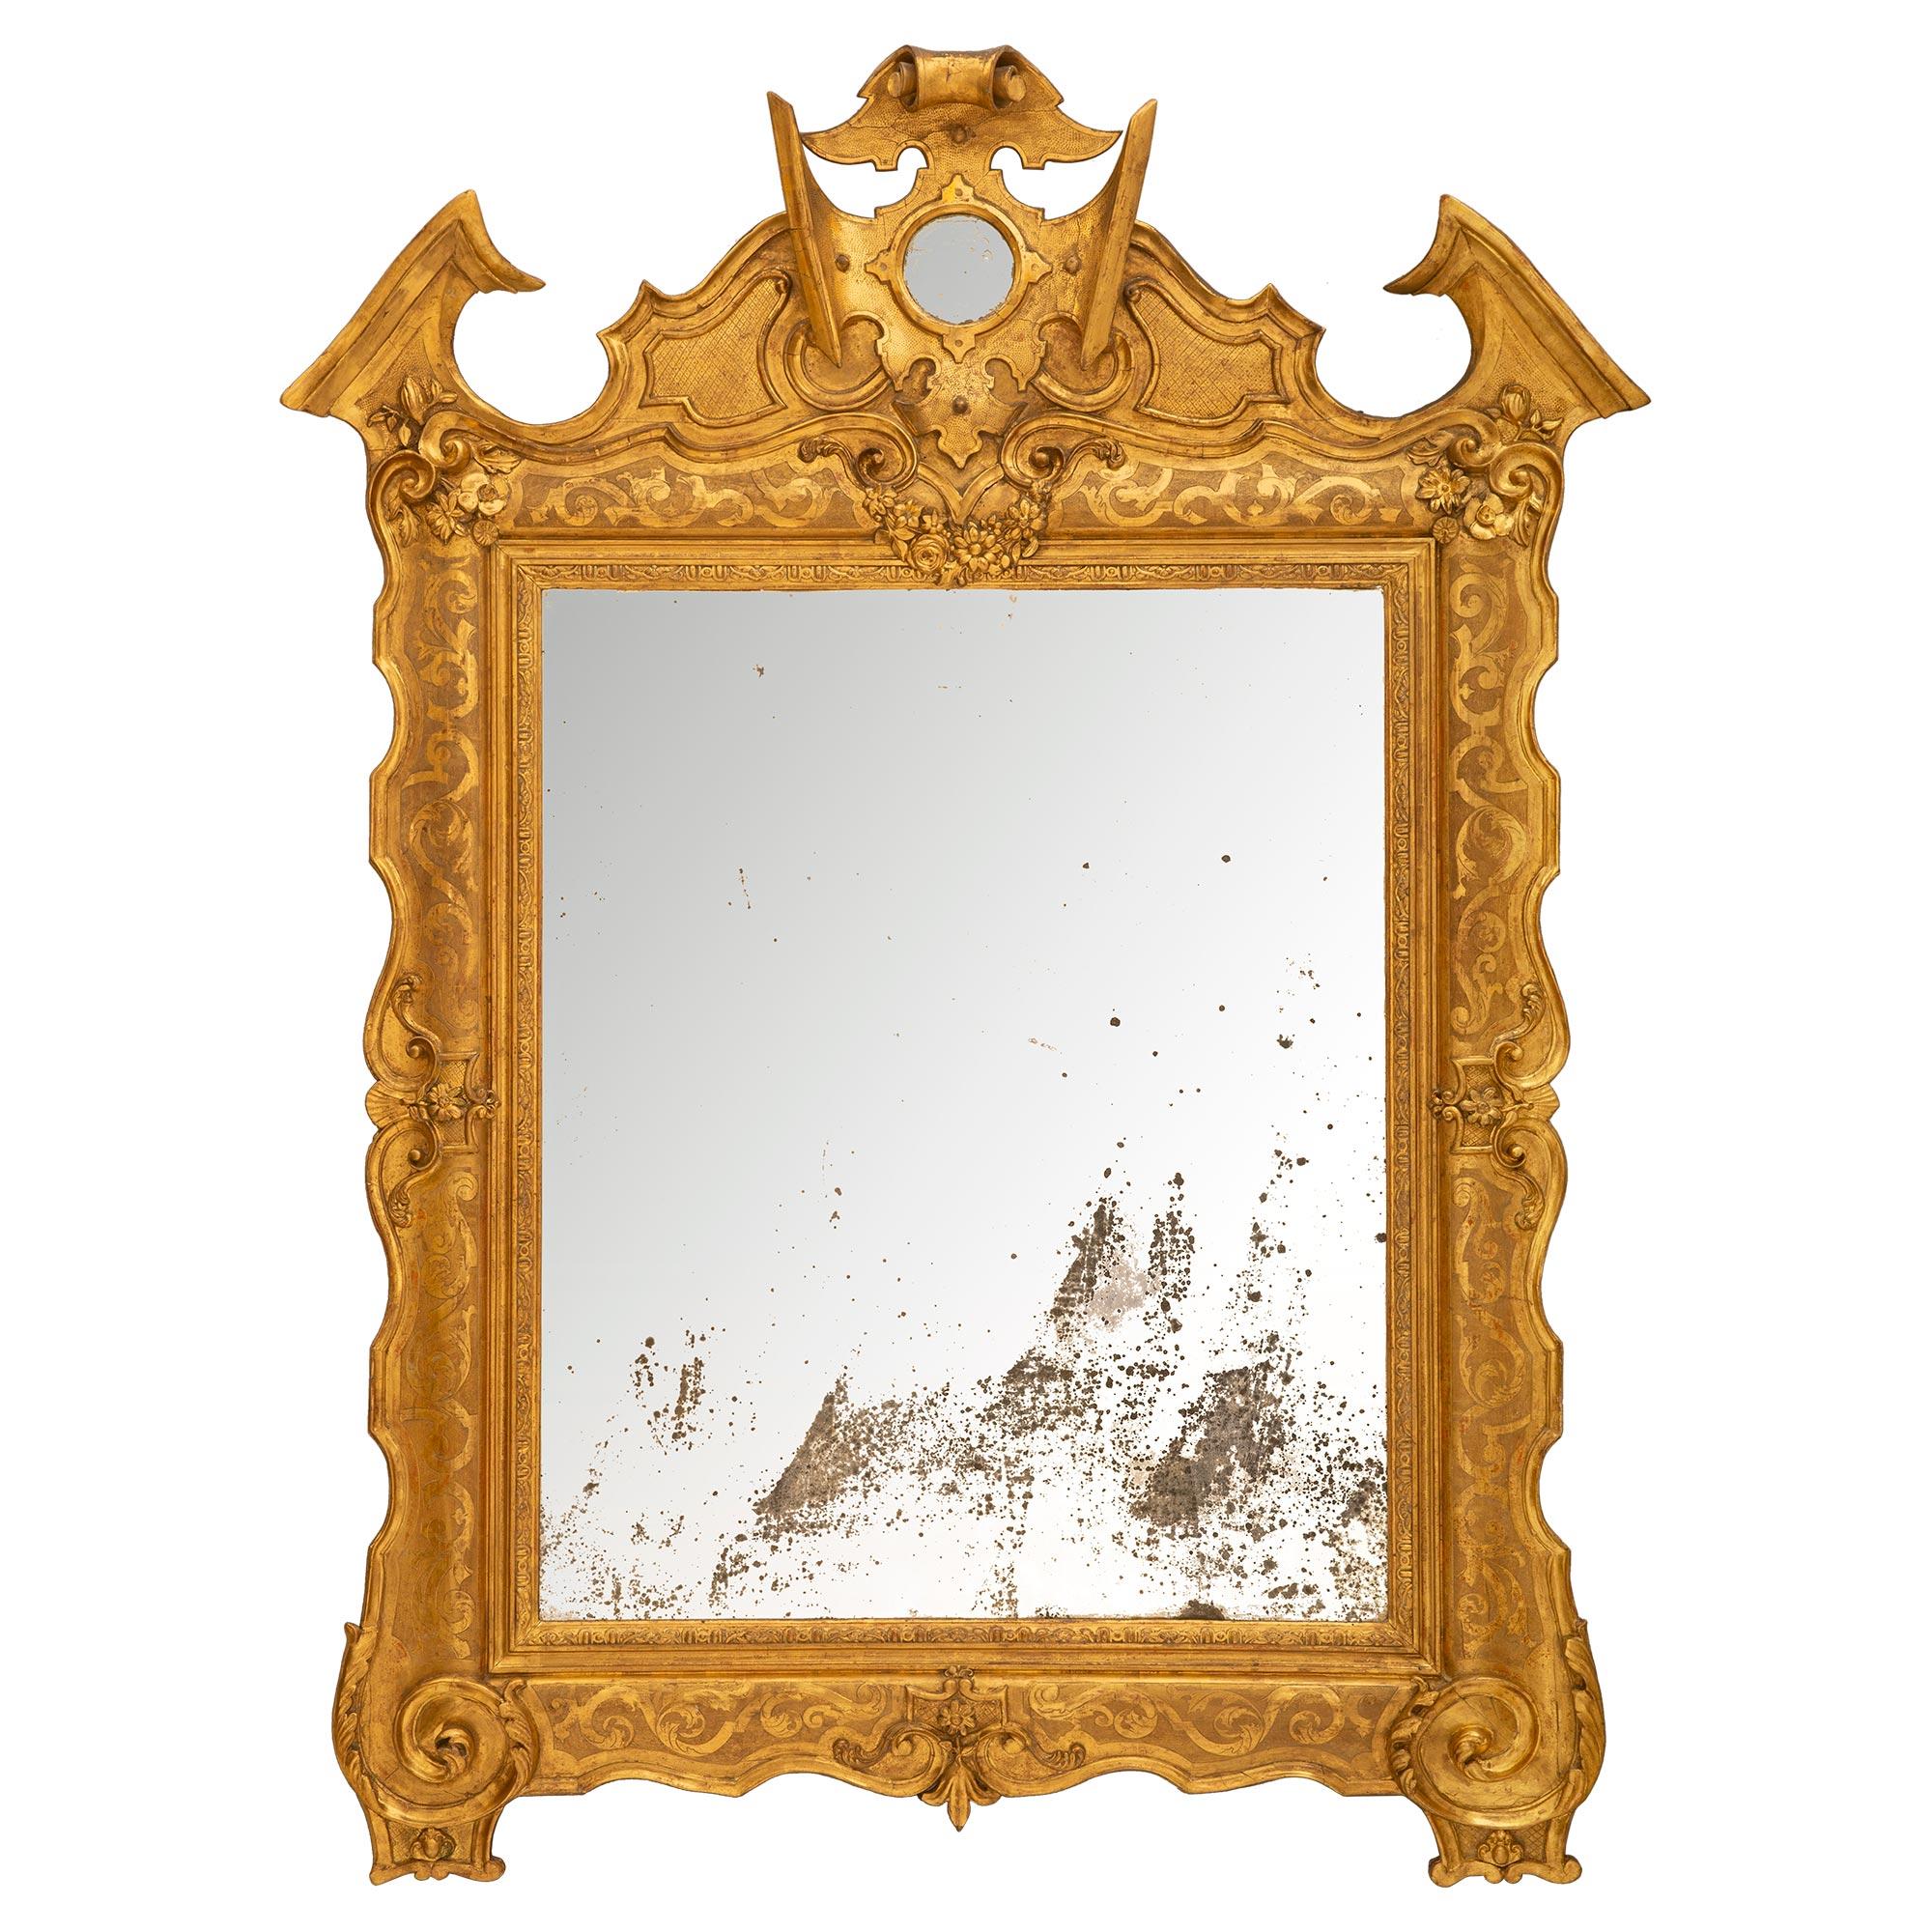 A very handsome Italian mid 19th century giltwood mirror from Naples. The original mirror plate is framed within a straight carved giltwood band with charming carvings within a fabulous scalloped frame. Mottled border and exquisite interlocking